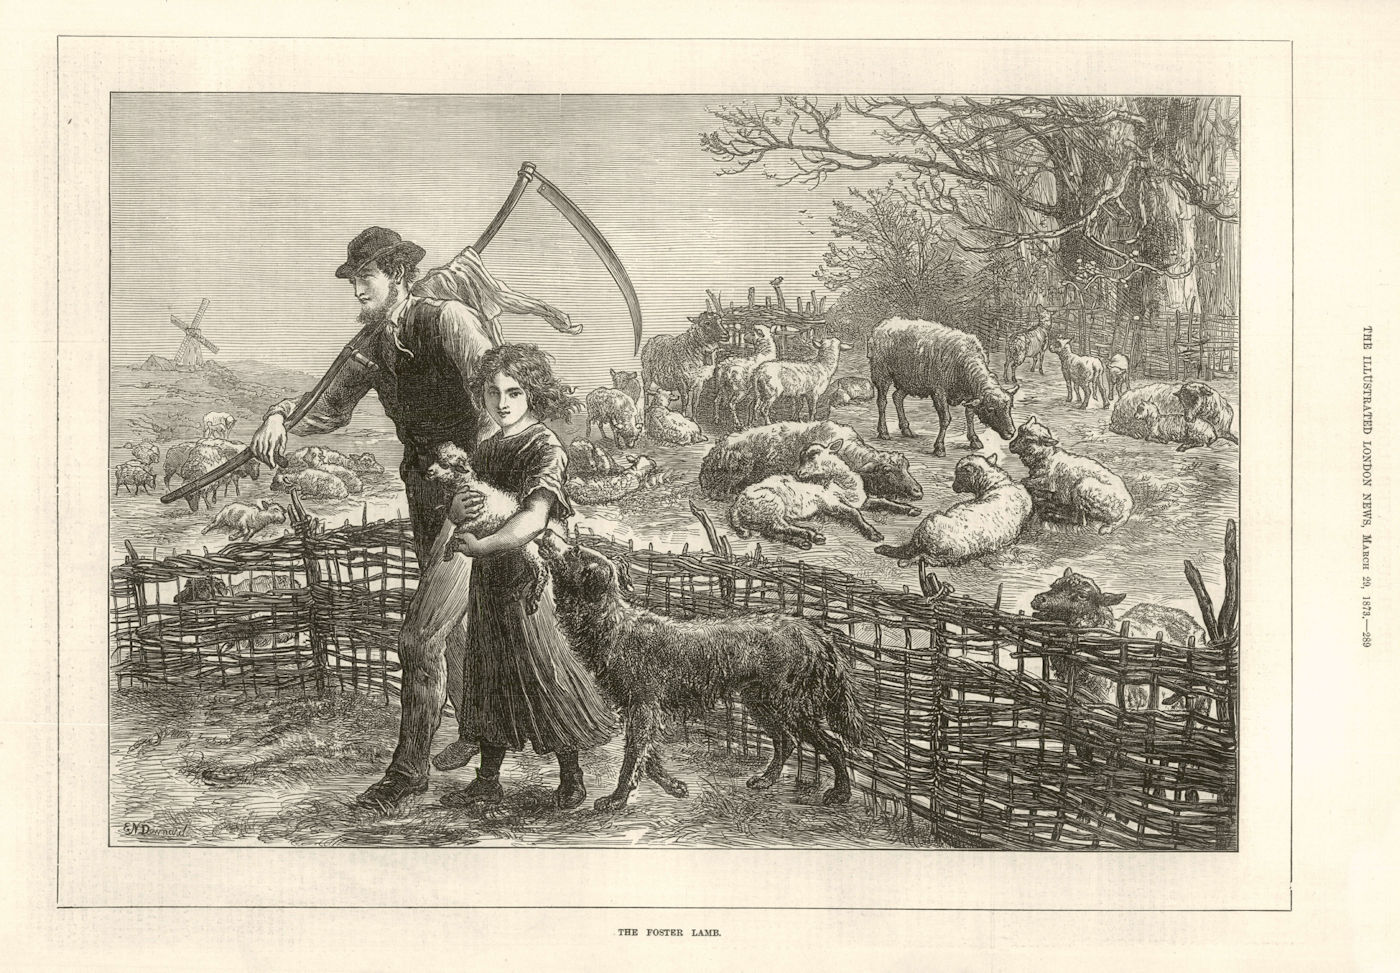 Associate Product The Foster Lamb. Sheep. Sickle. Windmill 1873 antique ILN full page print